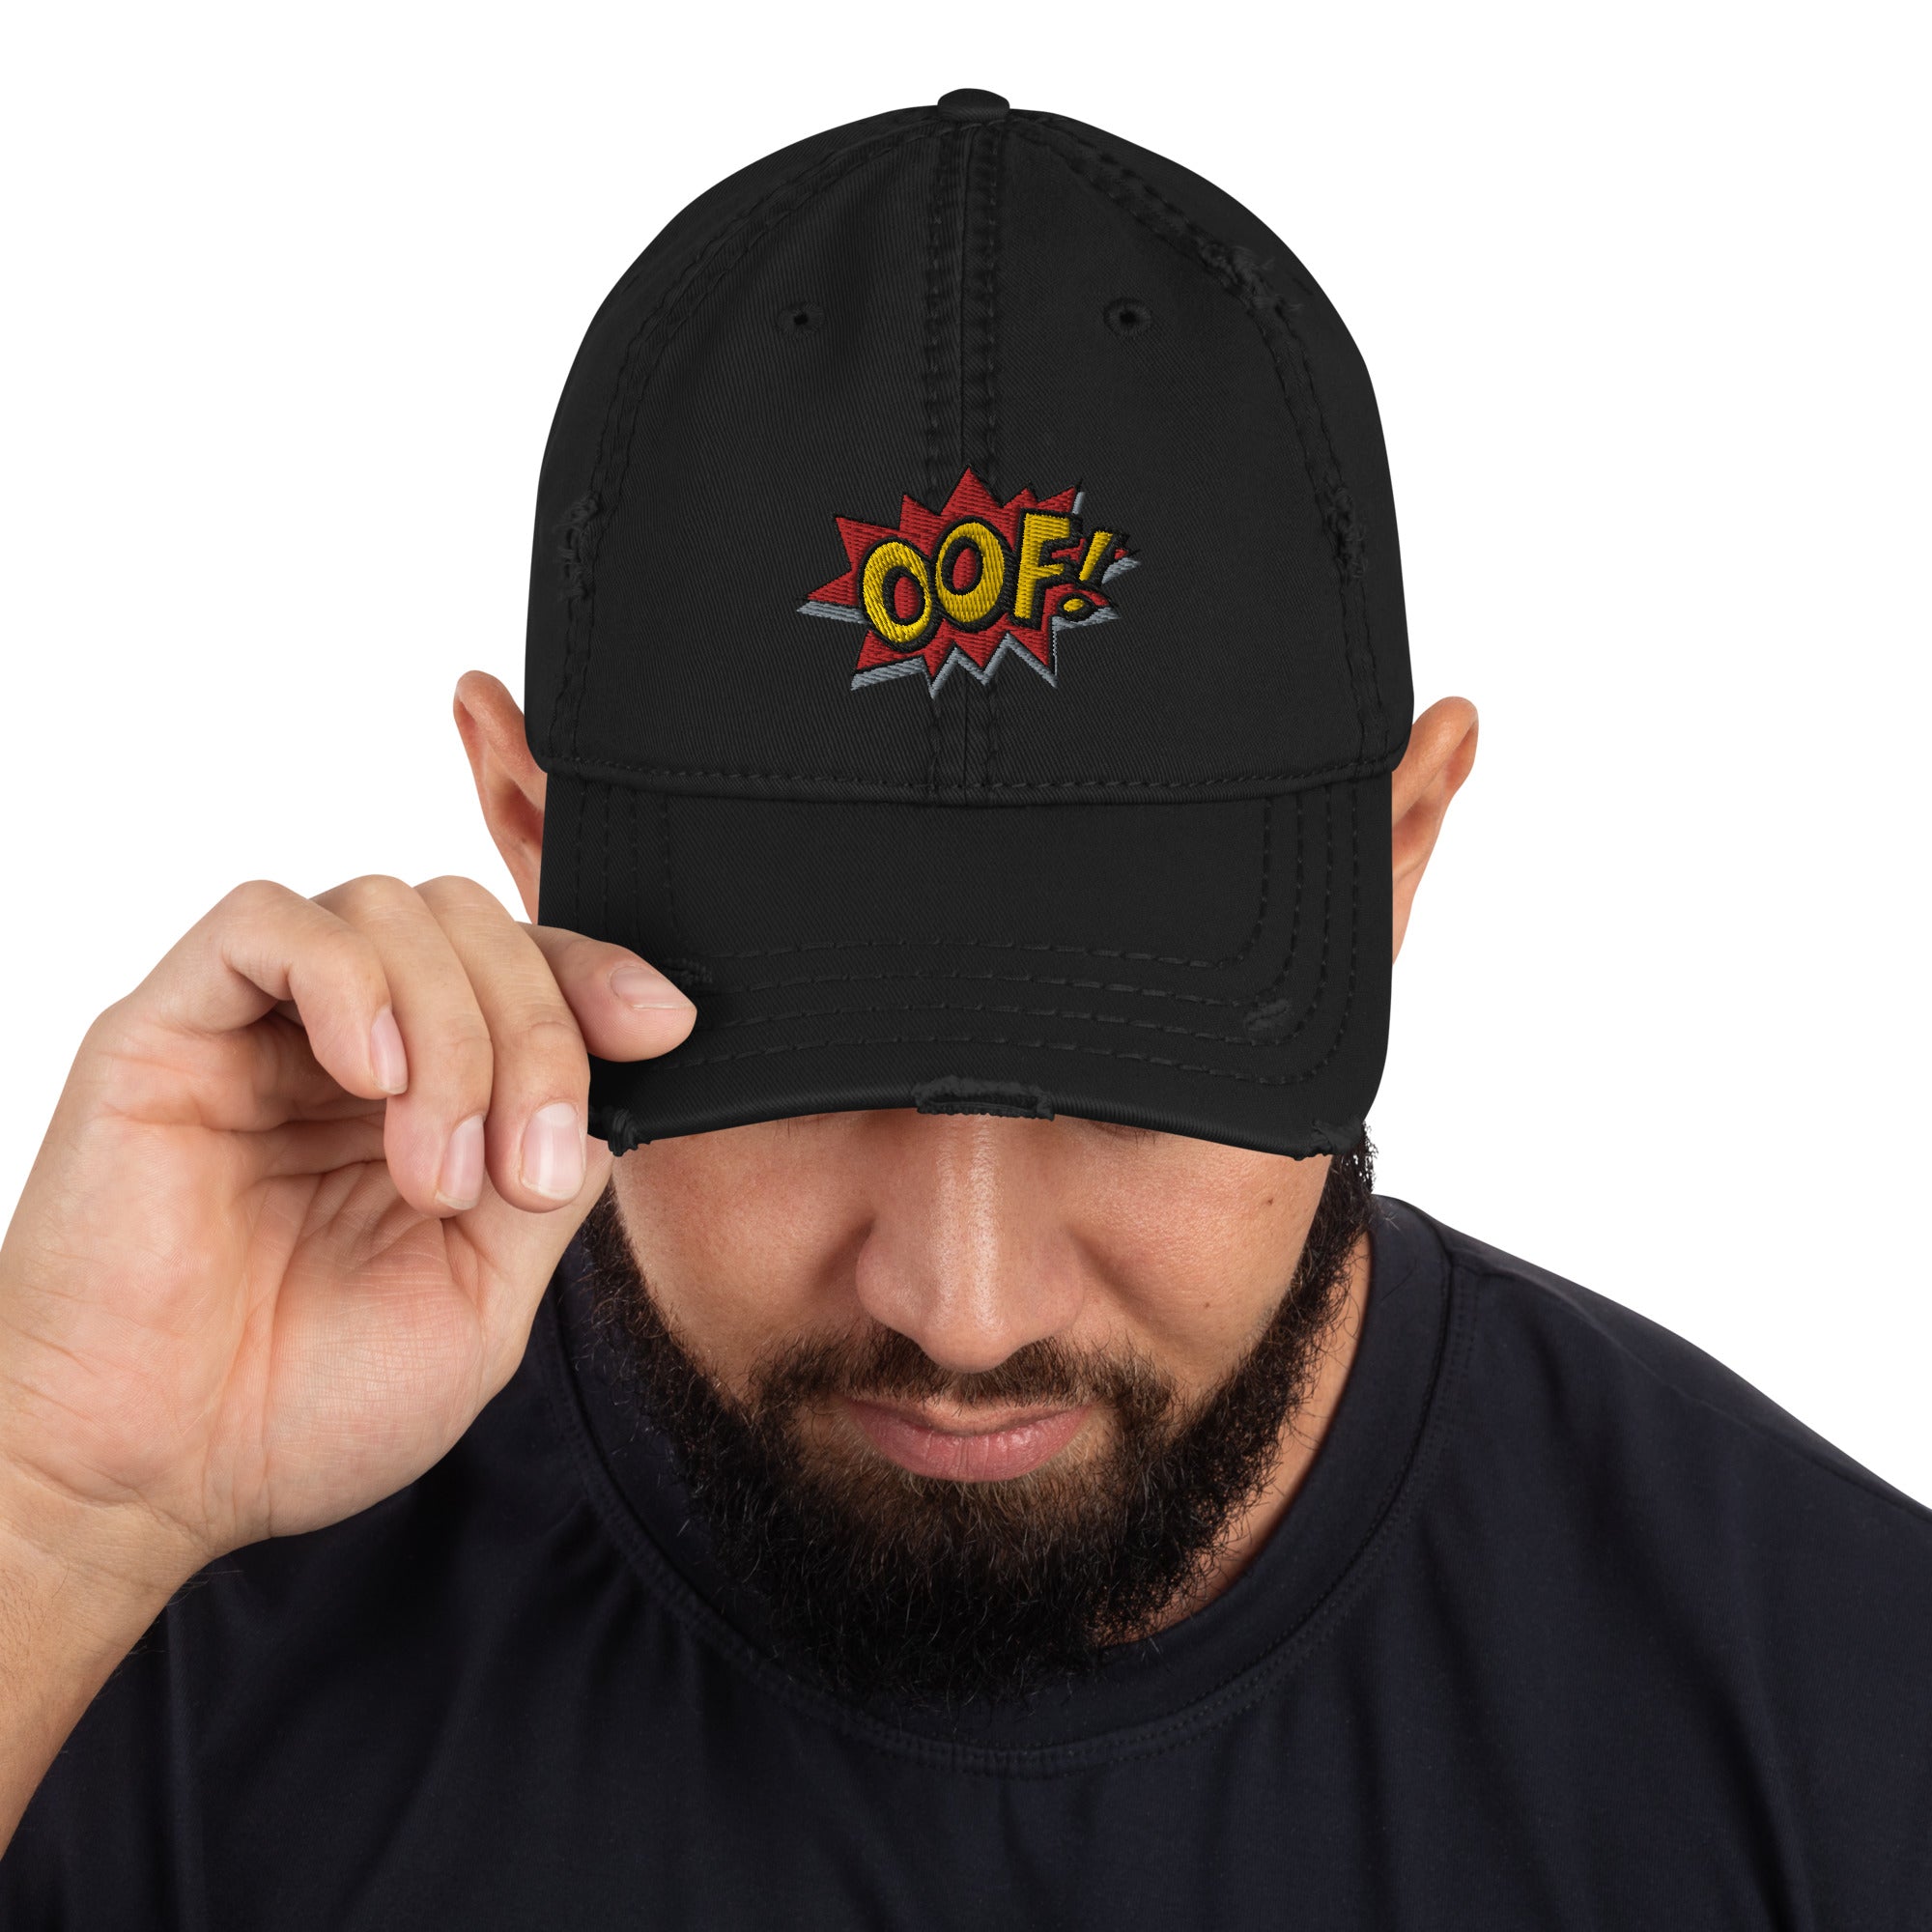 The Official OOF! Store – TheOOFstore